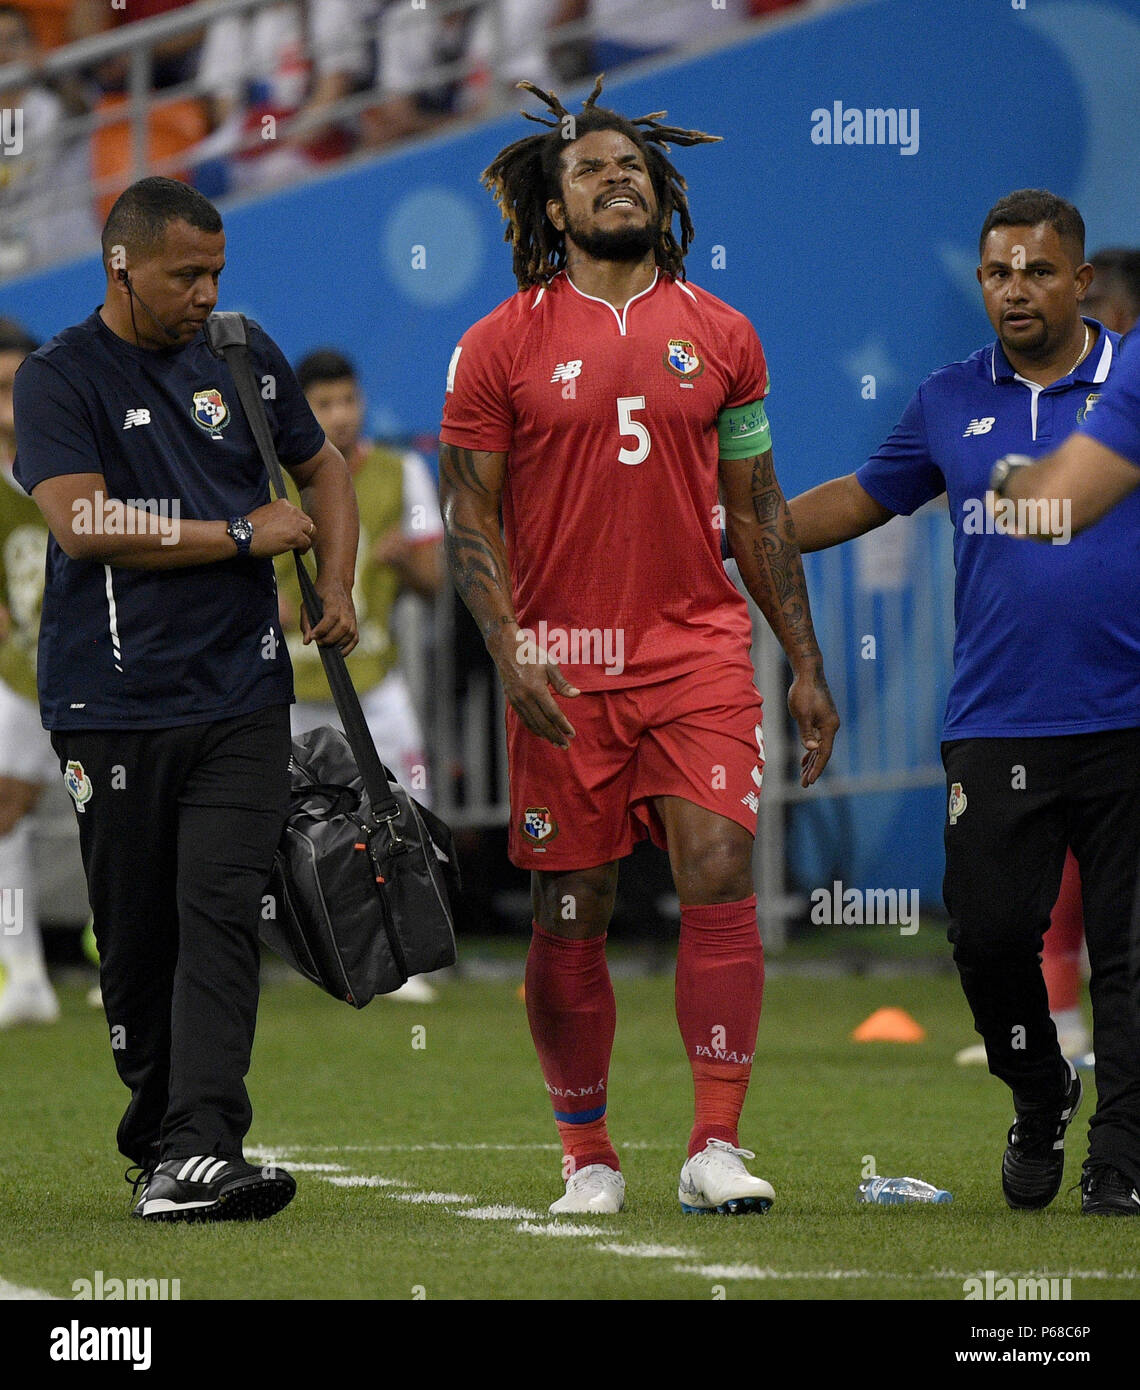 Saransk, Russia. 28th June, 2018. Roman Torres (C) of Panama leaves the pitch after his injury during the 2018 FIFA World Cup Group G match between Panama and Tunisia in Saransk, Russia, June 28, 2018. Credit: Lui Siu Wai/Xinhua/Alamy Live News Stock Photo